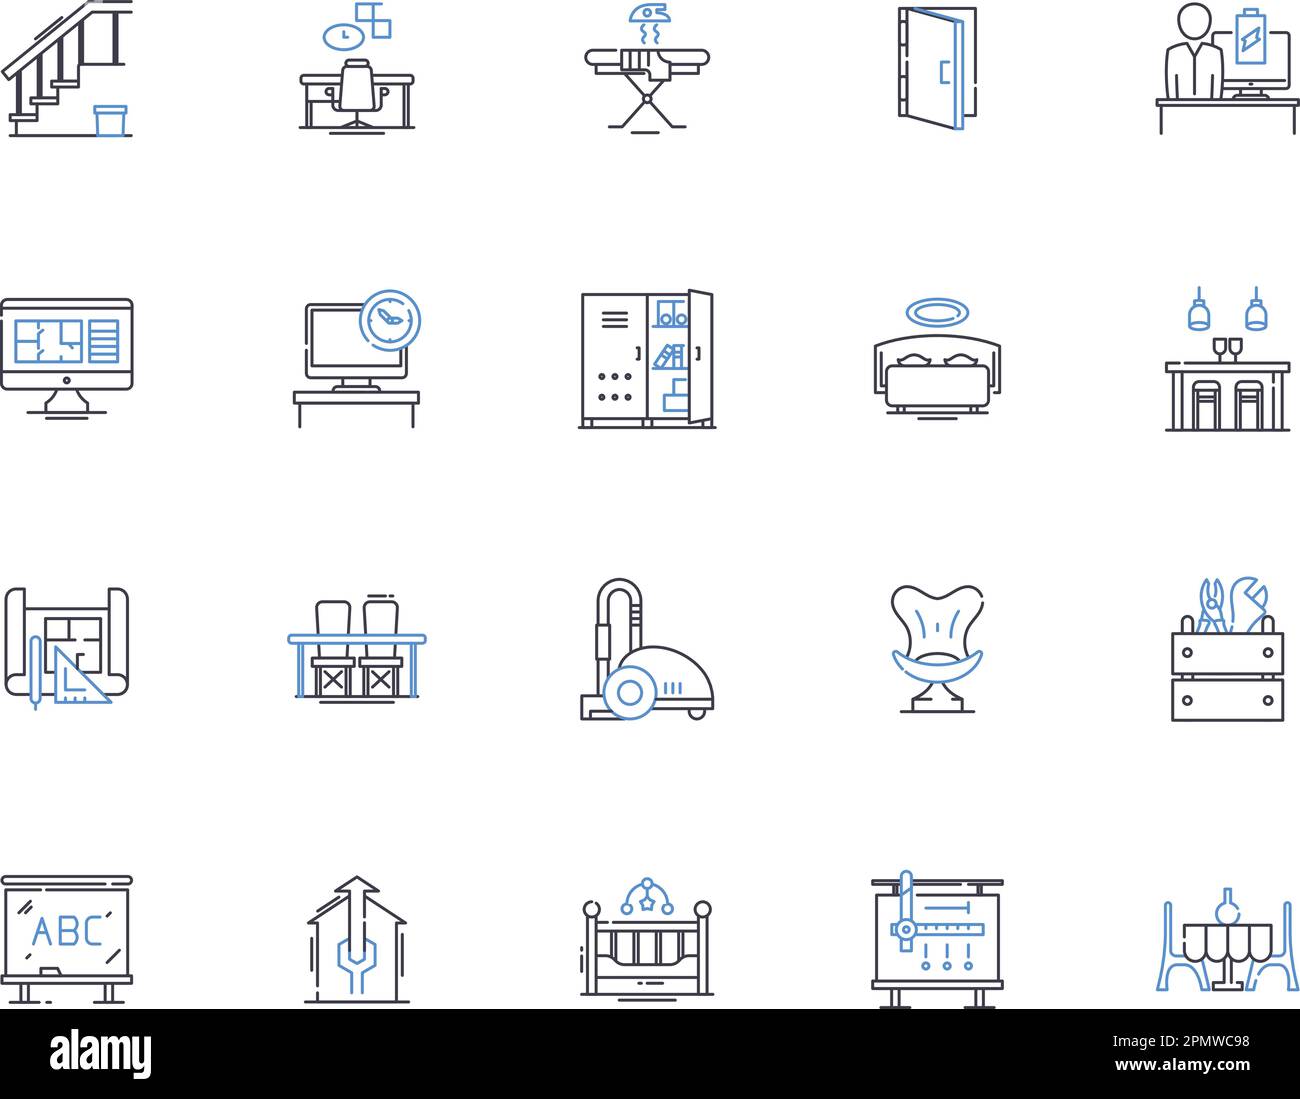 Furniture outline icons collection. Couch, Chair, Table, Desk, Bed, Bookcase, Dresser vector and illustration concept set. Ottoman, Sofa, Shelves Stock Vector